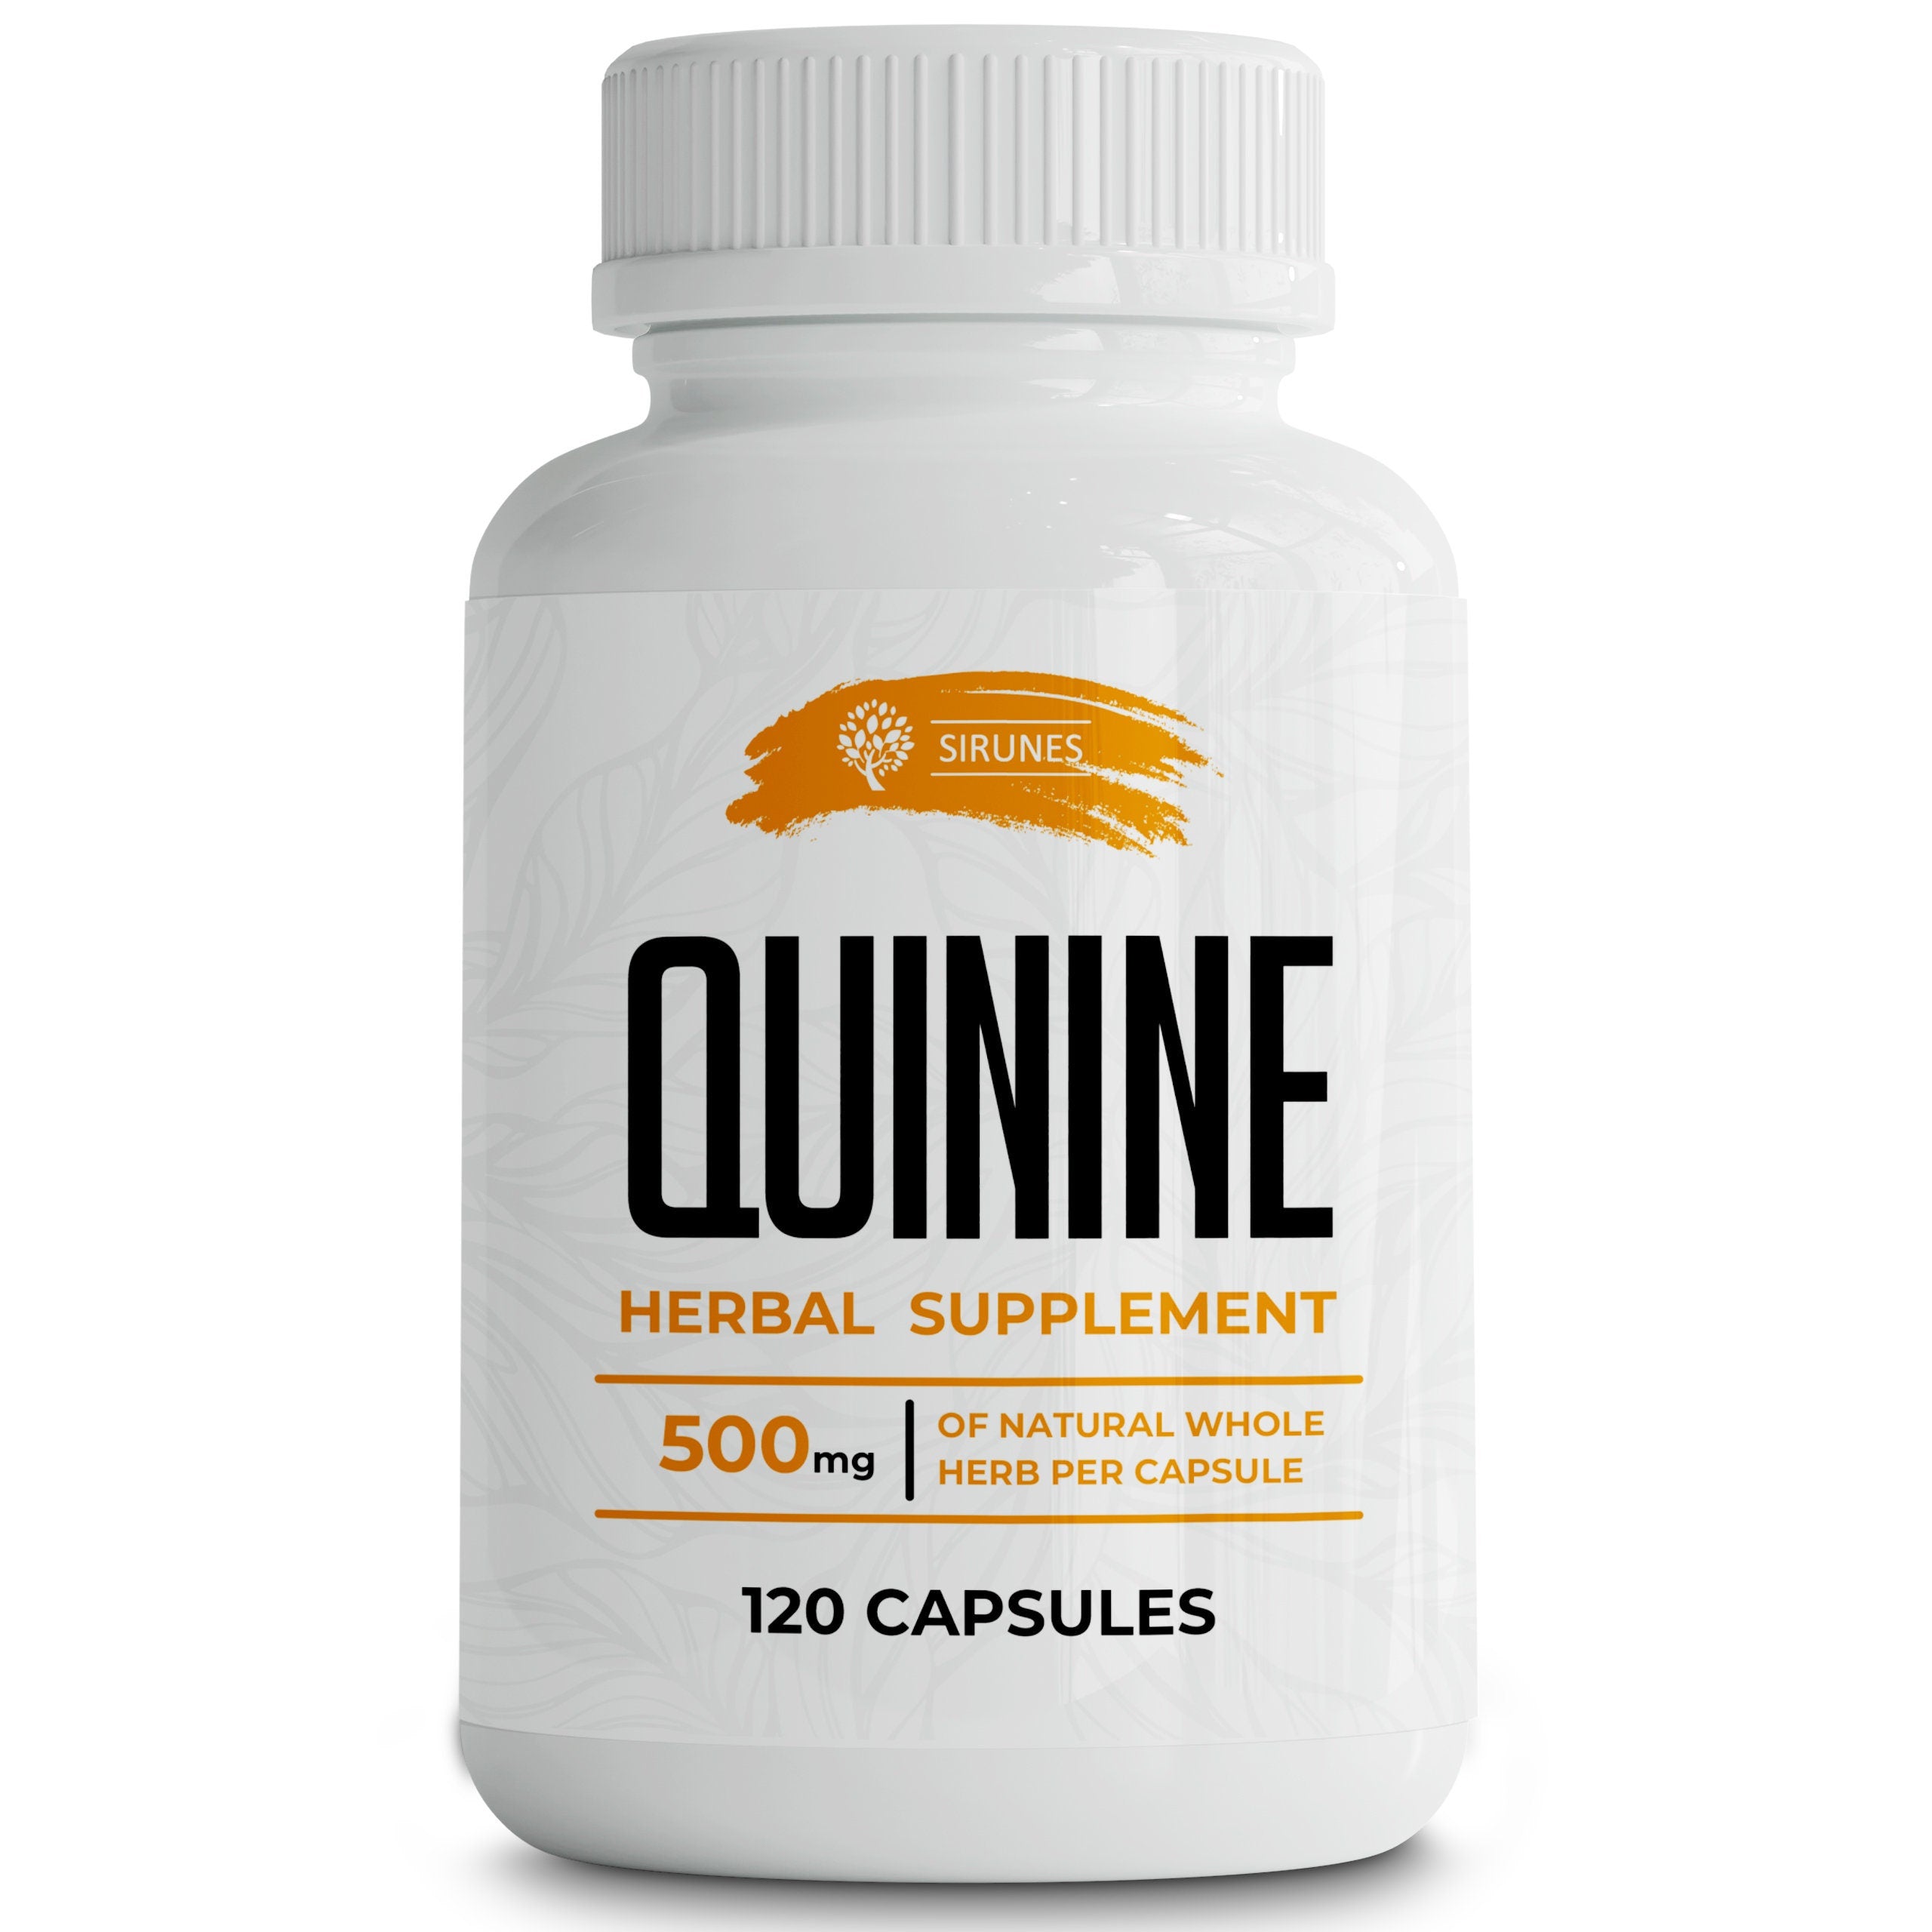 Quinine Capsules 120 Caps - Cinchona Officinalis Bark Herbal Supplement for Leg Cramping Relief, Cramp Defense and Overall Digestive Health